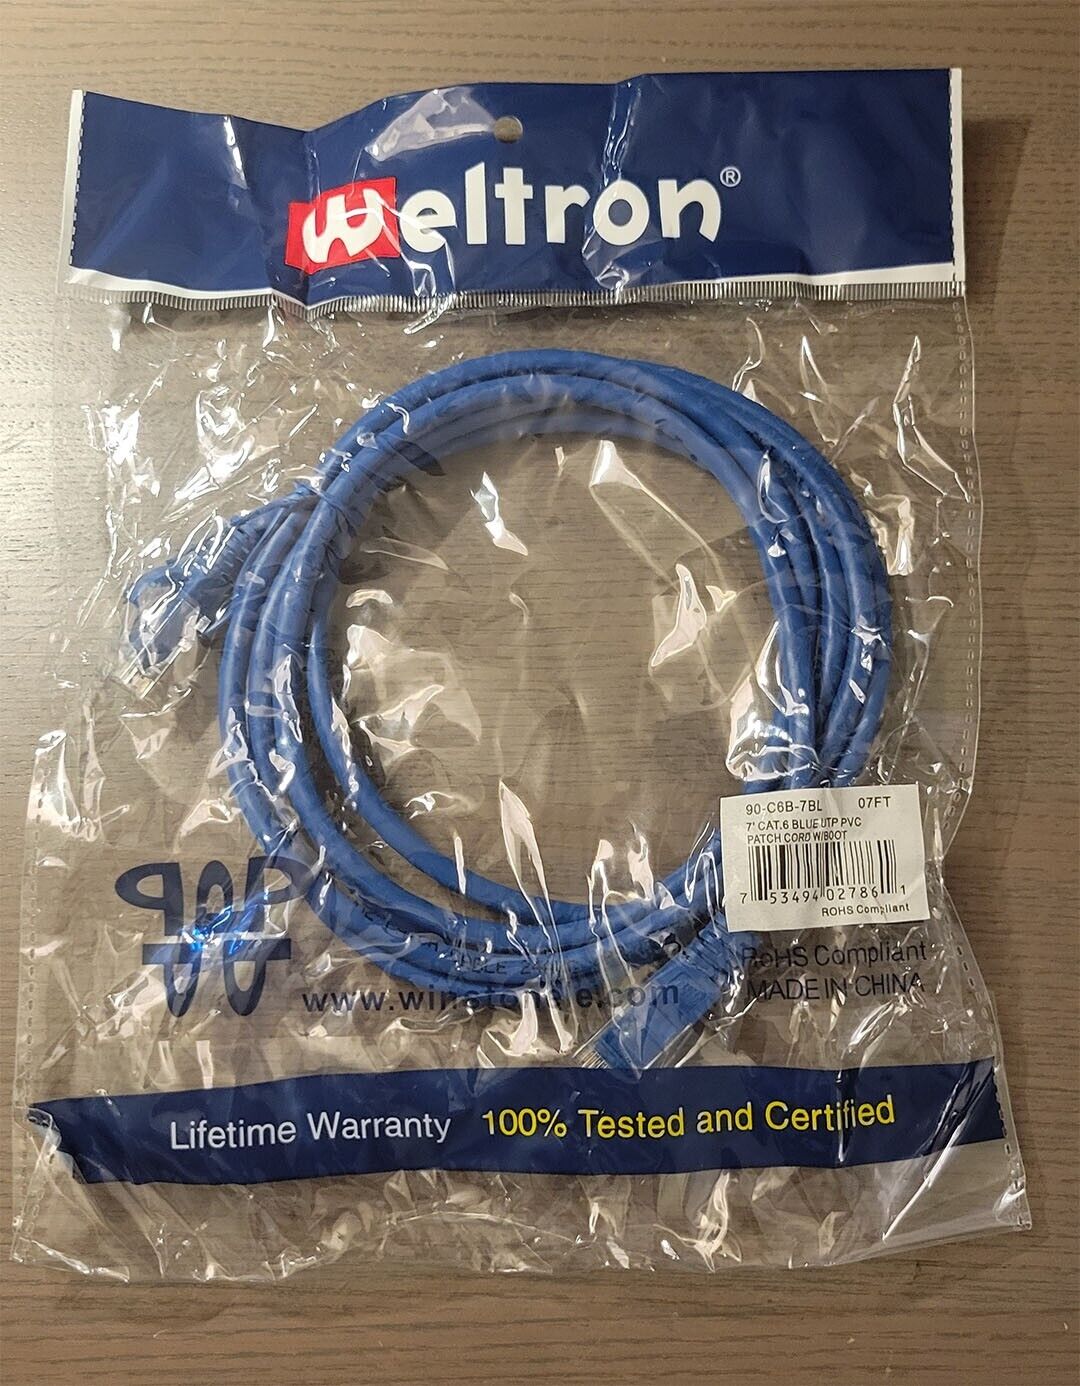 Weltron 90-C6B-5BL Patch Cable NEW SEALED